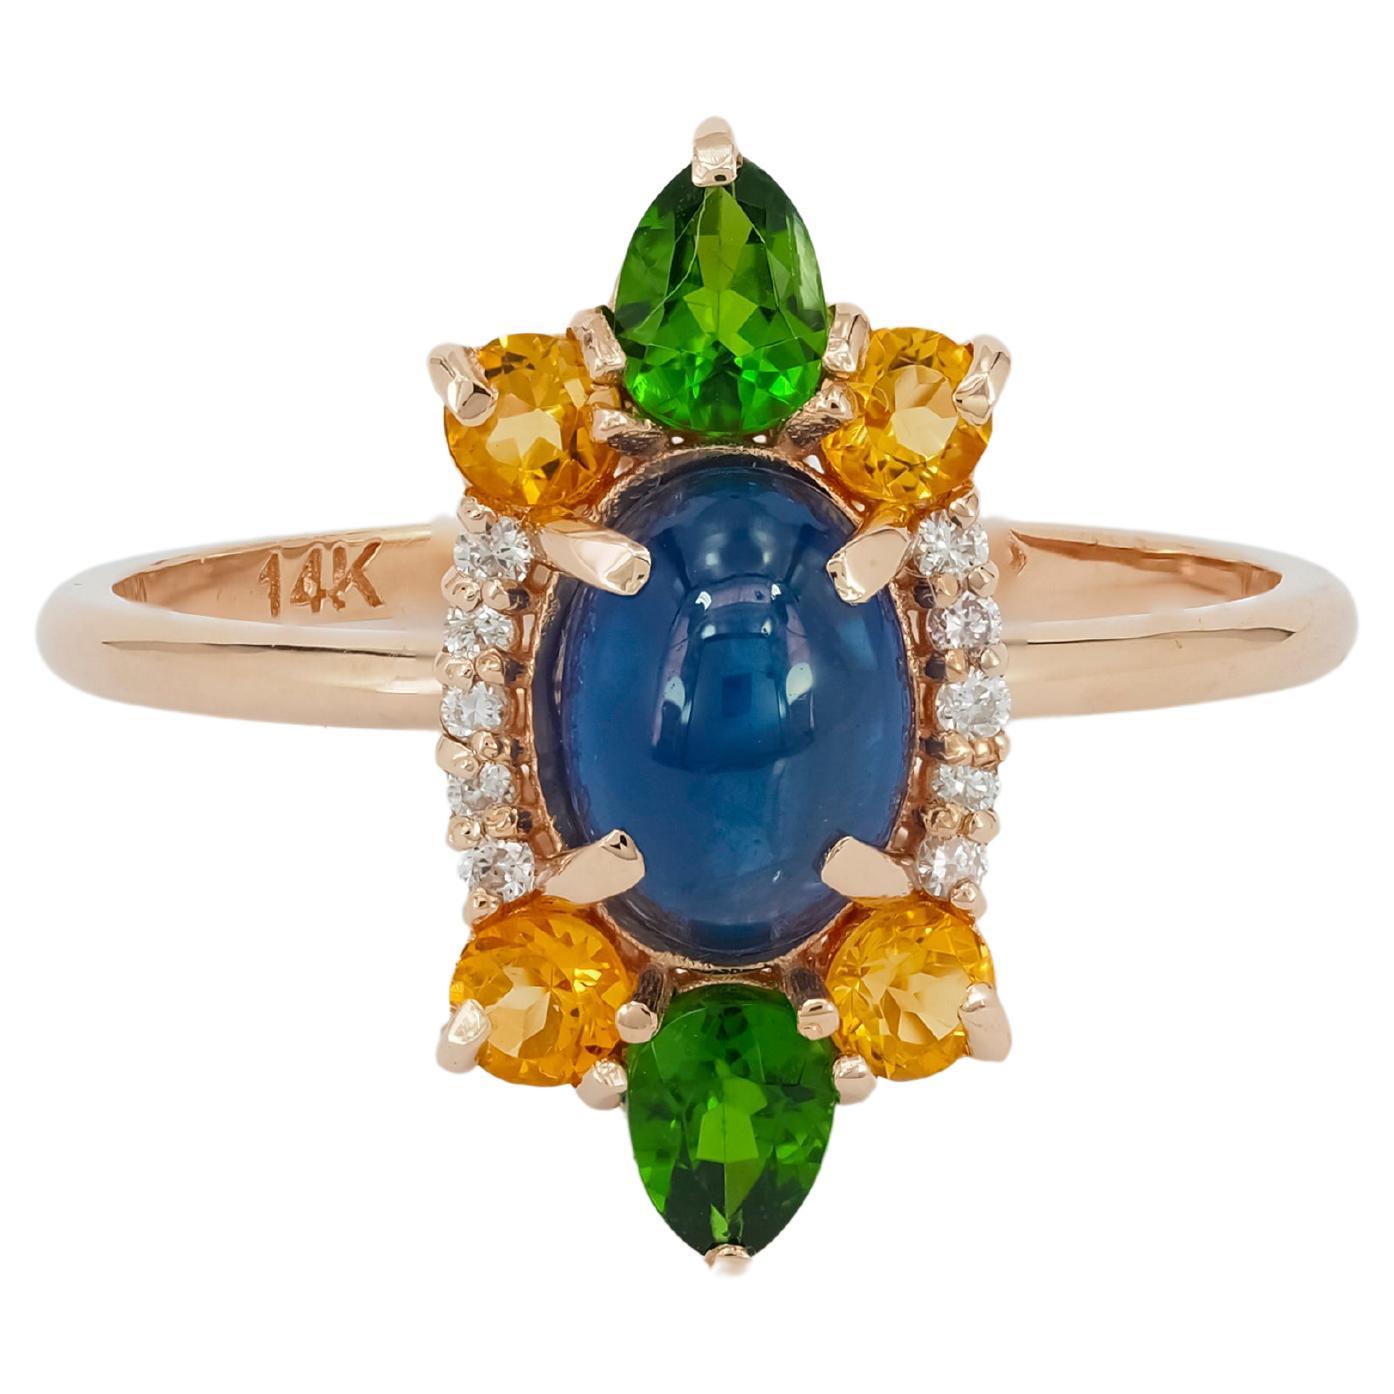 14k Gold ring with cabochon Sapphire, Chrome diopsides, Sapphires, Diamonds. 